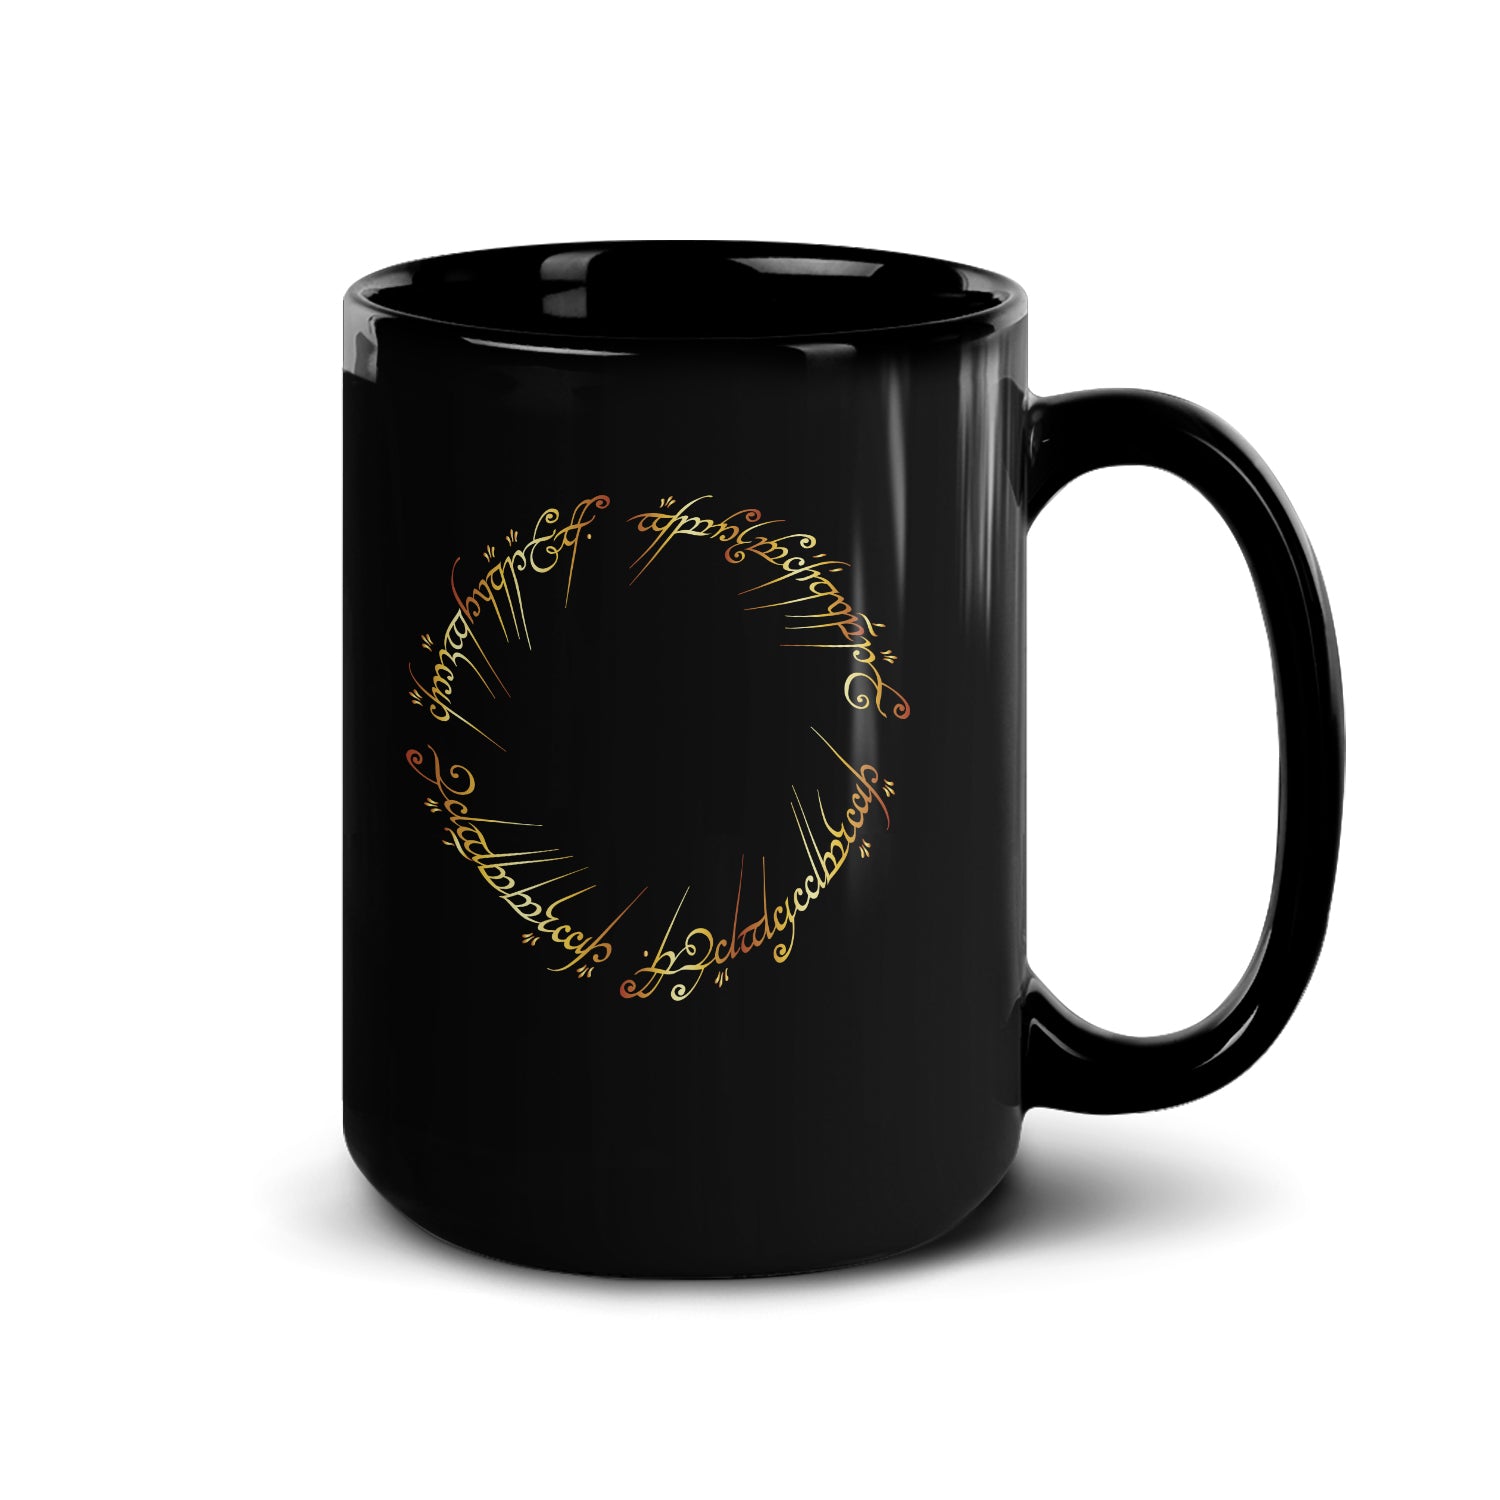  Morphing Mugs Lord of the Rings (One Ring) Ceramic Mug, Black :  Home & Kitchen